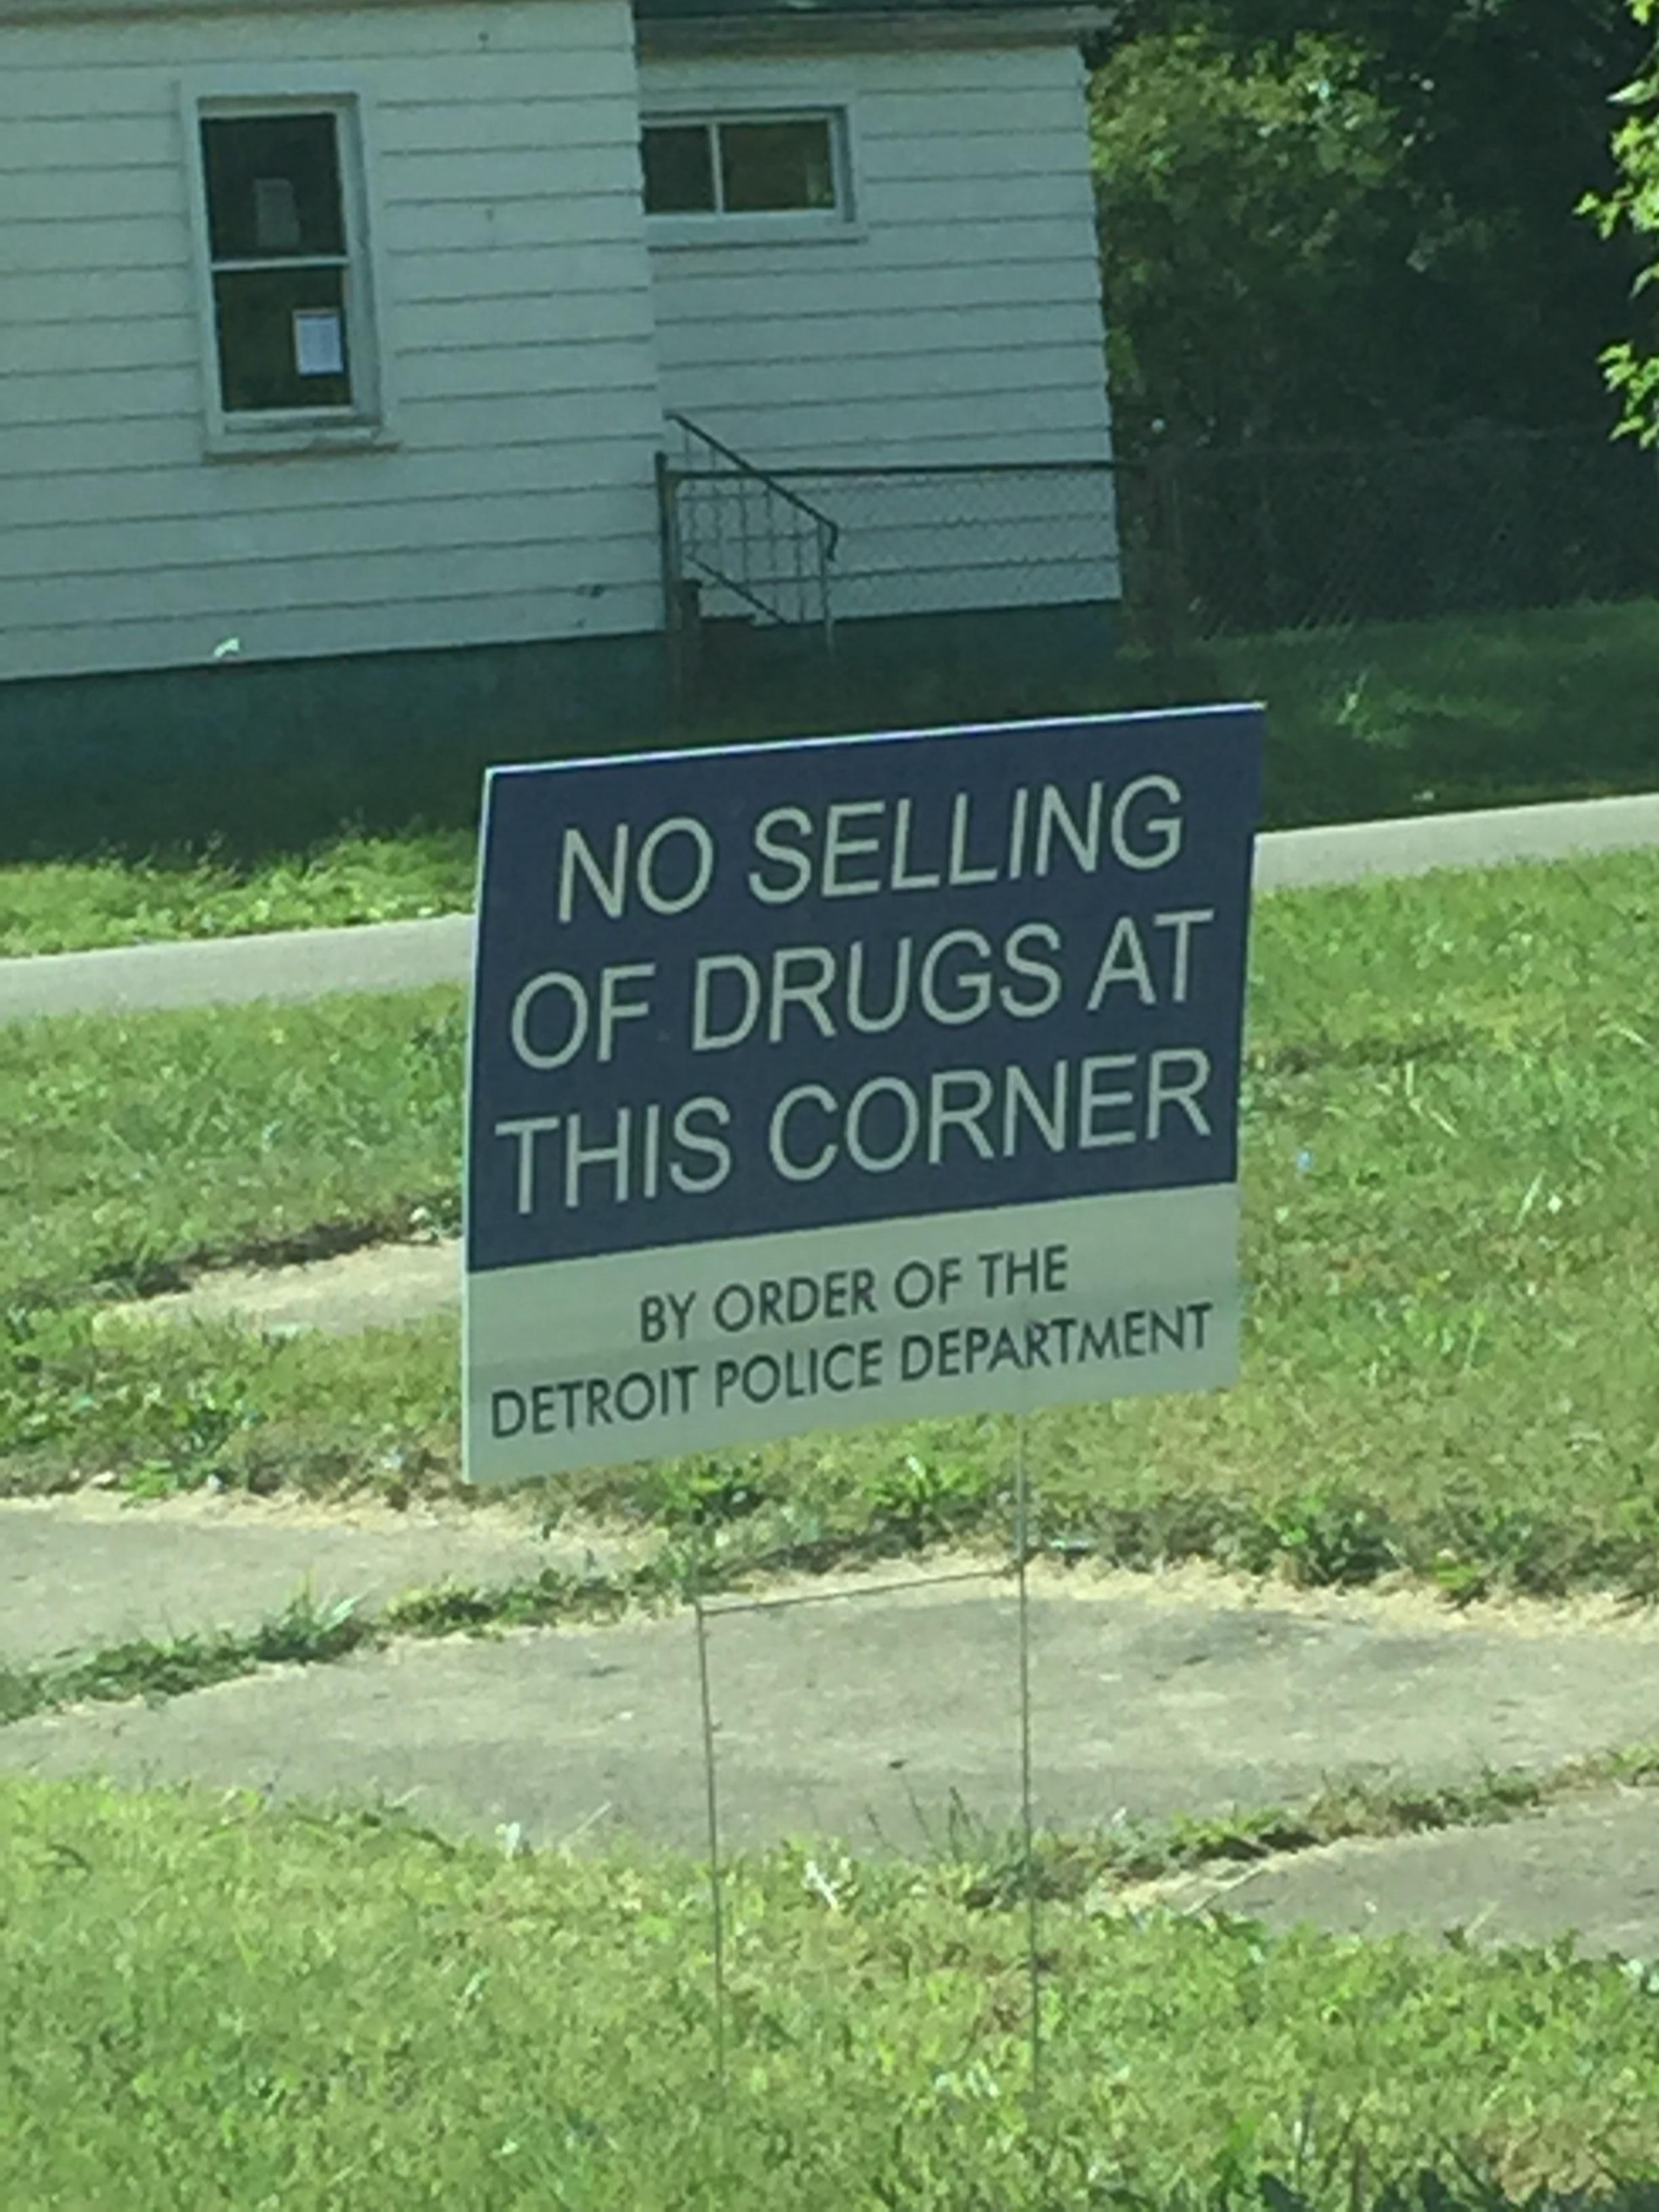 no selling drugs - No Selling Of Drugs At This Corner By Order Of The Detroit Police Department